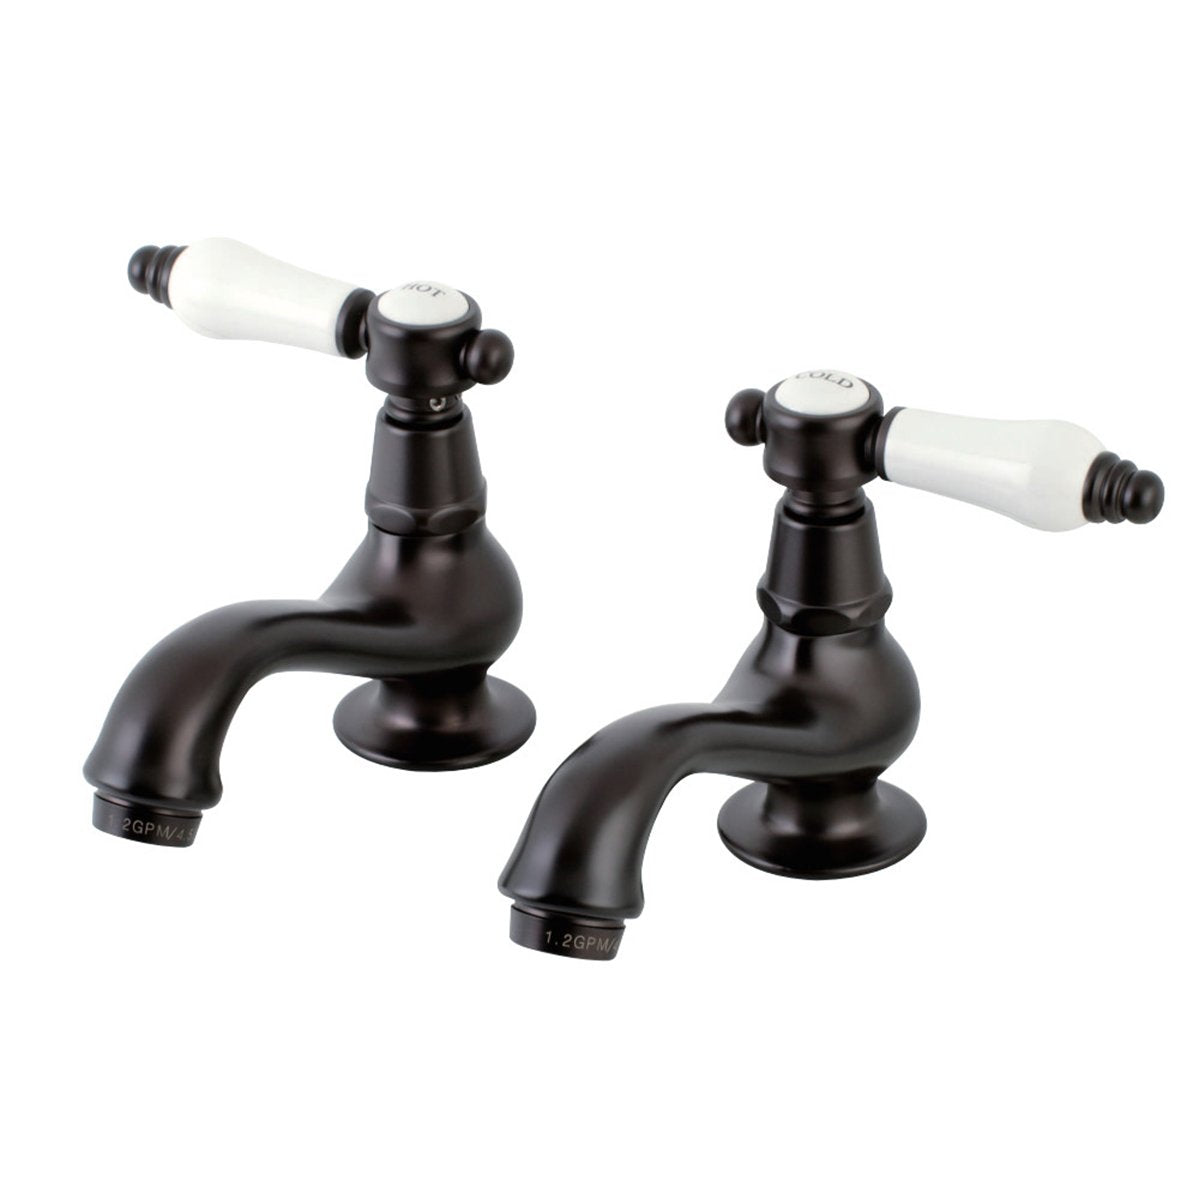 Kingston Brass Basin Tap Faucet with Lever Handle